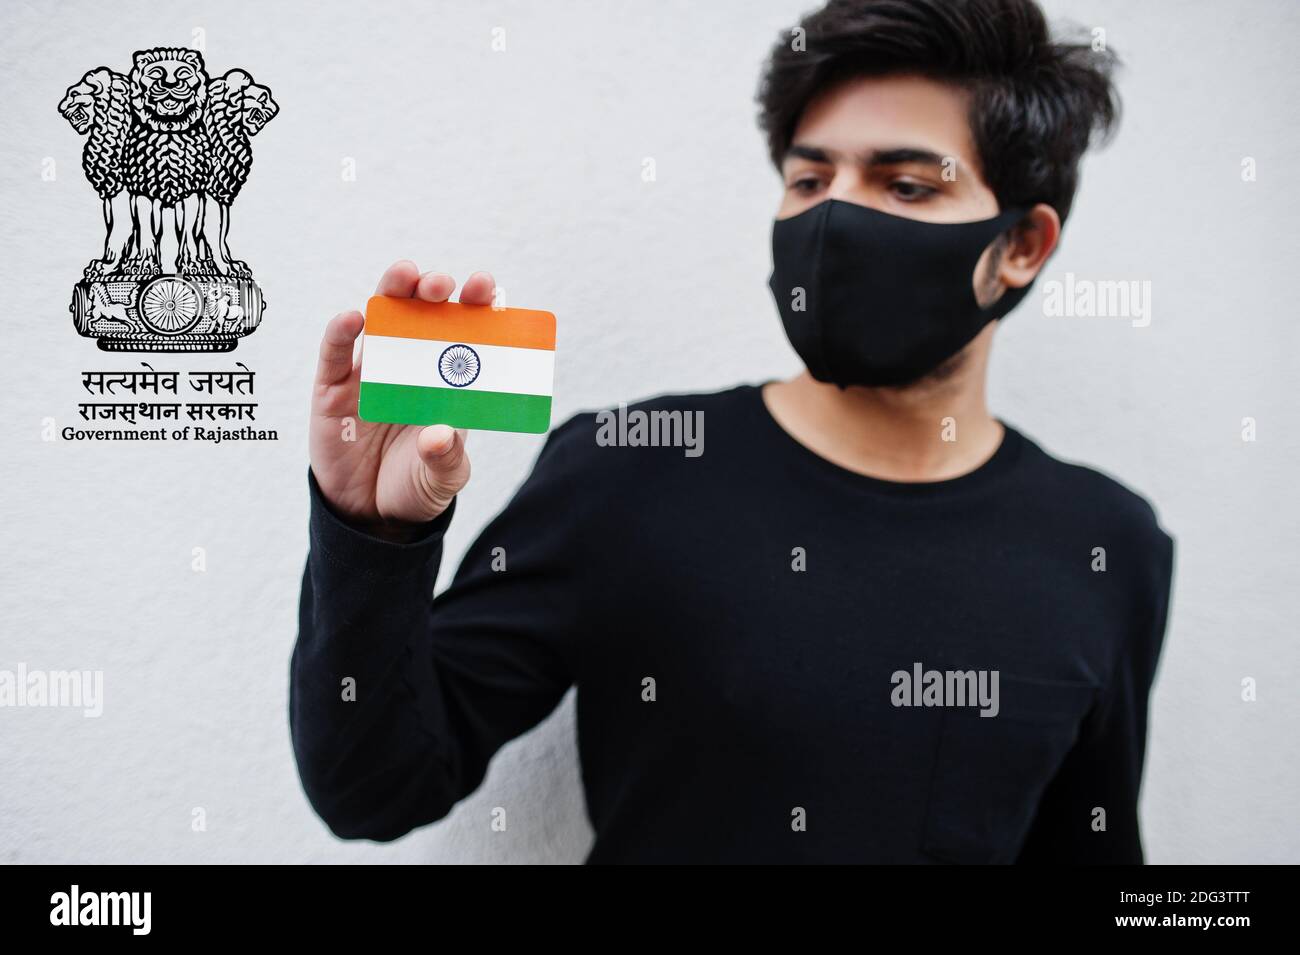 Indian man wear all black and face mask, hold India flag in hand isolated on white background with Rajasthan state emblem . Coronavirus India states a Stock Photo